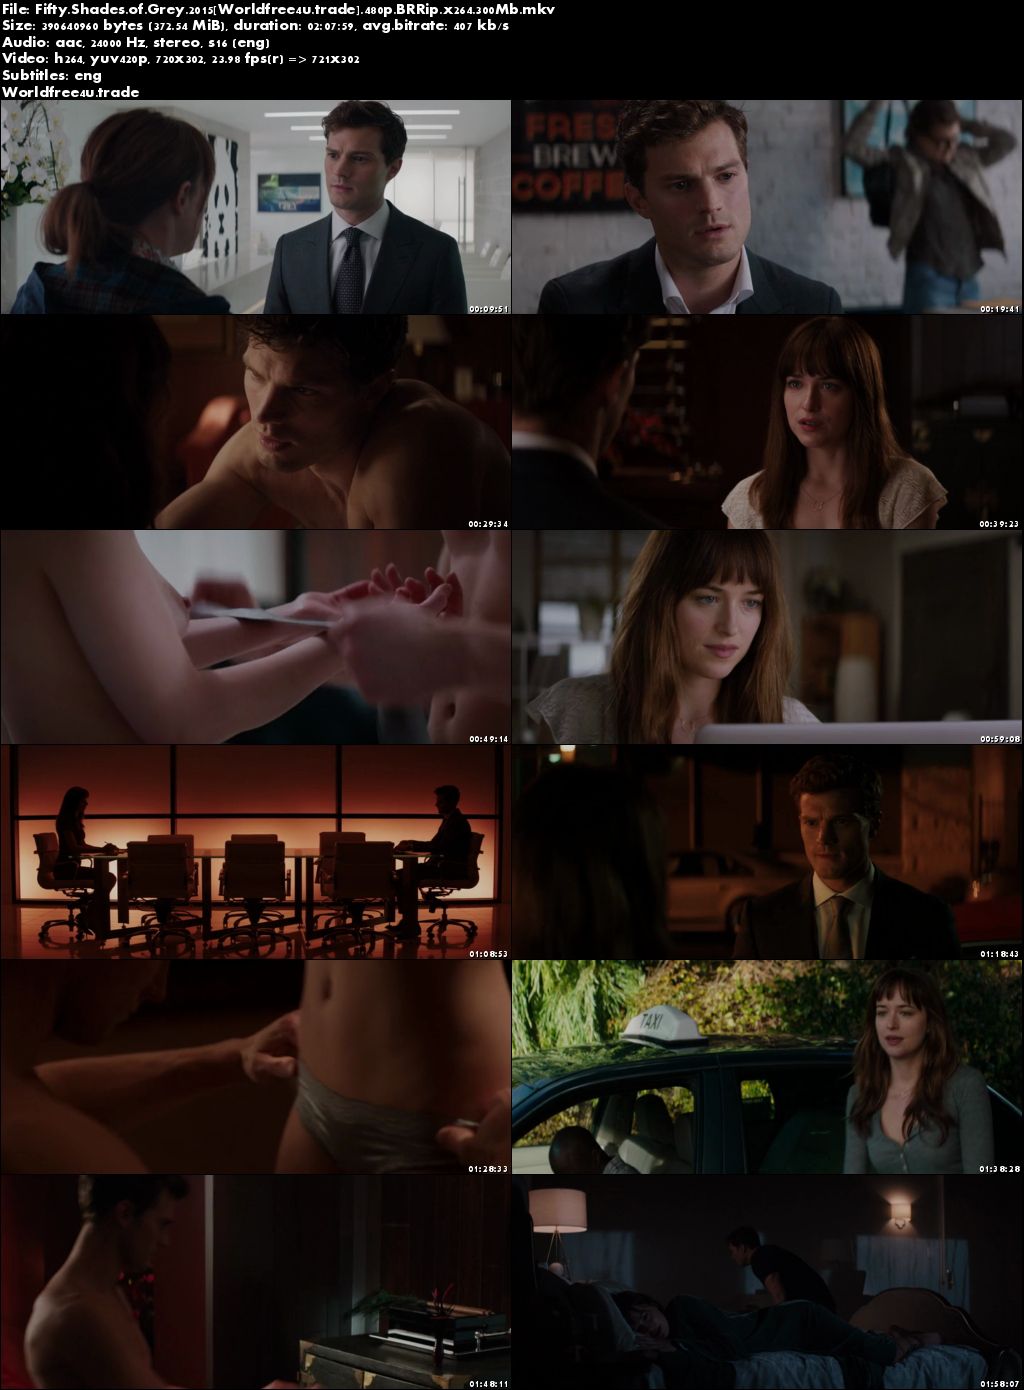 free download fifty shades of grey full movie in hindi